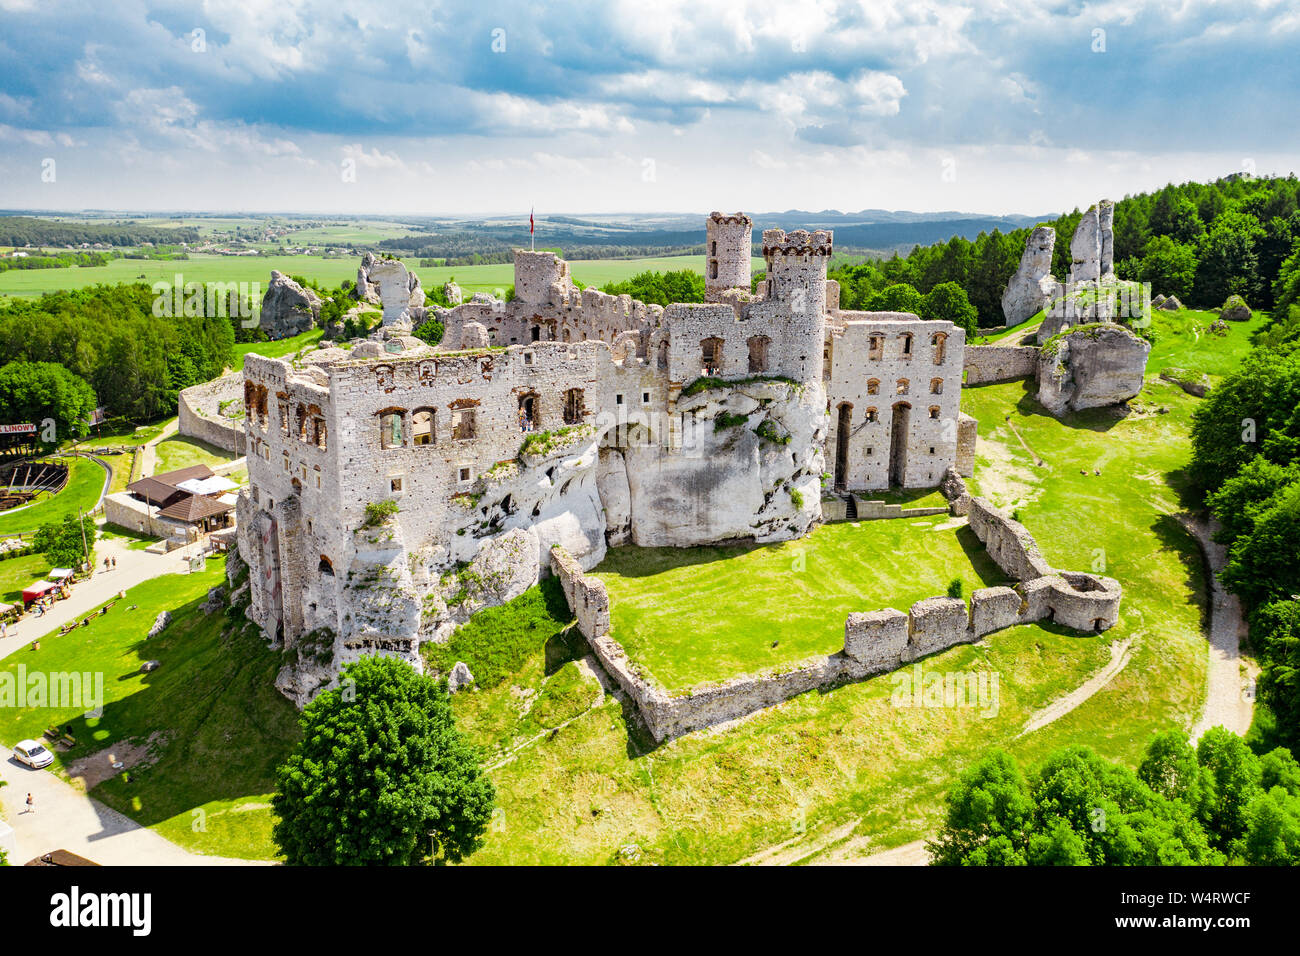 medieval castle ruins located in Ogrodzieniec, Poland Stock Photo